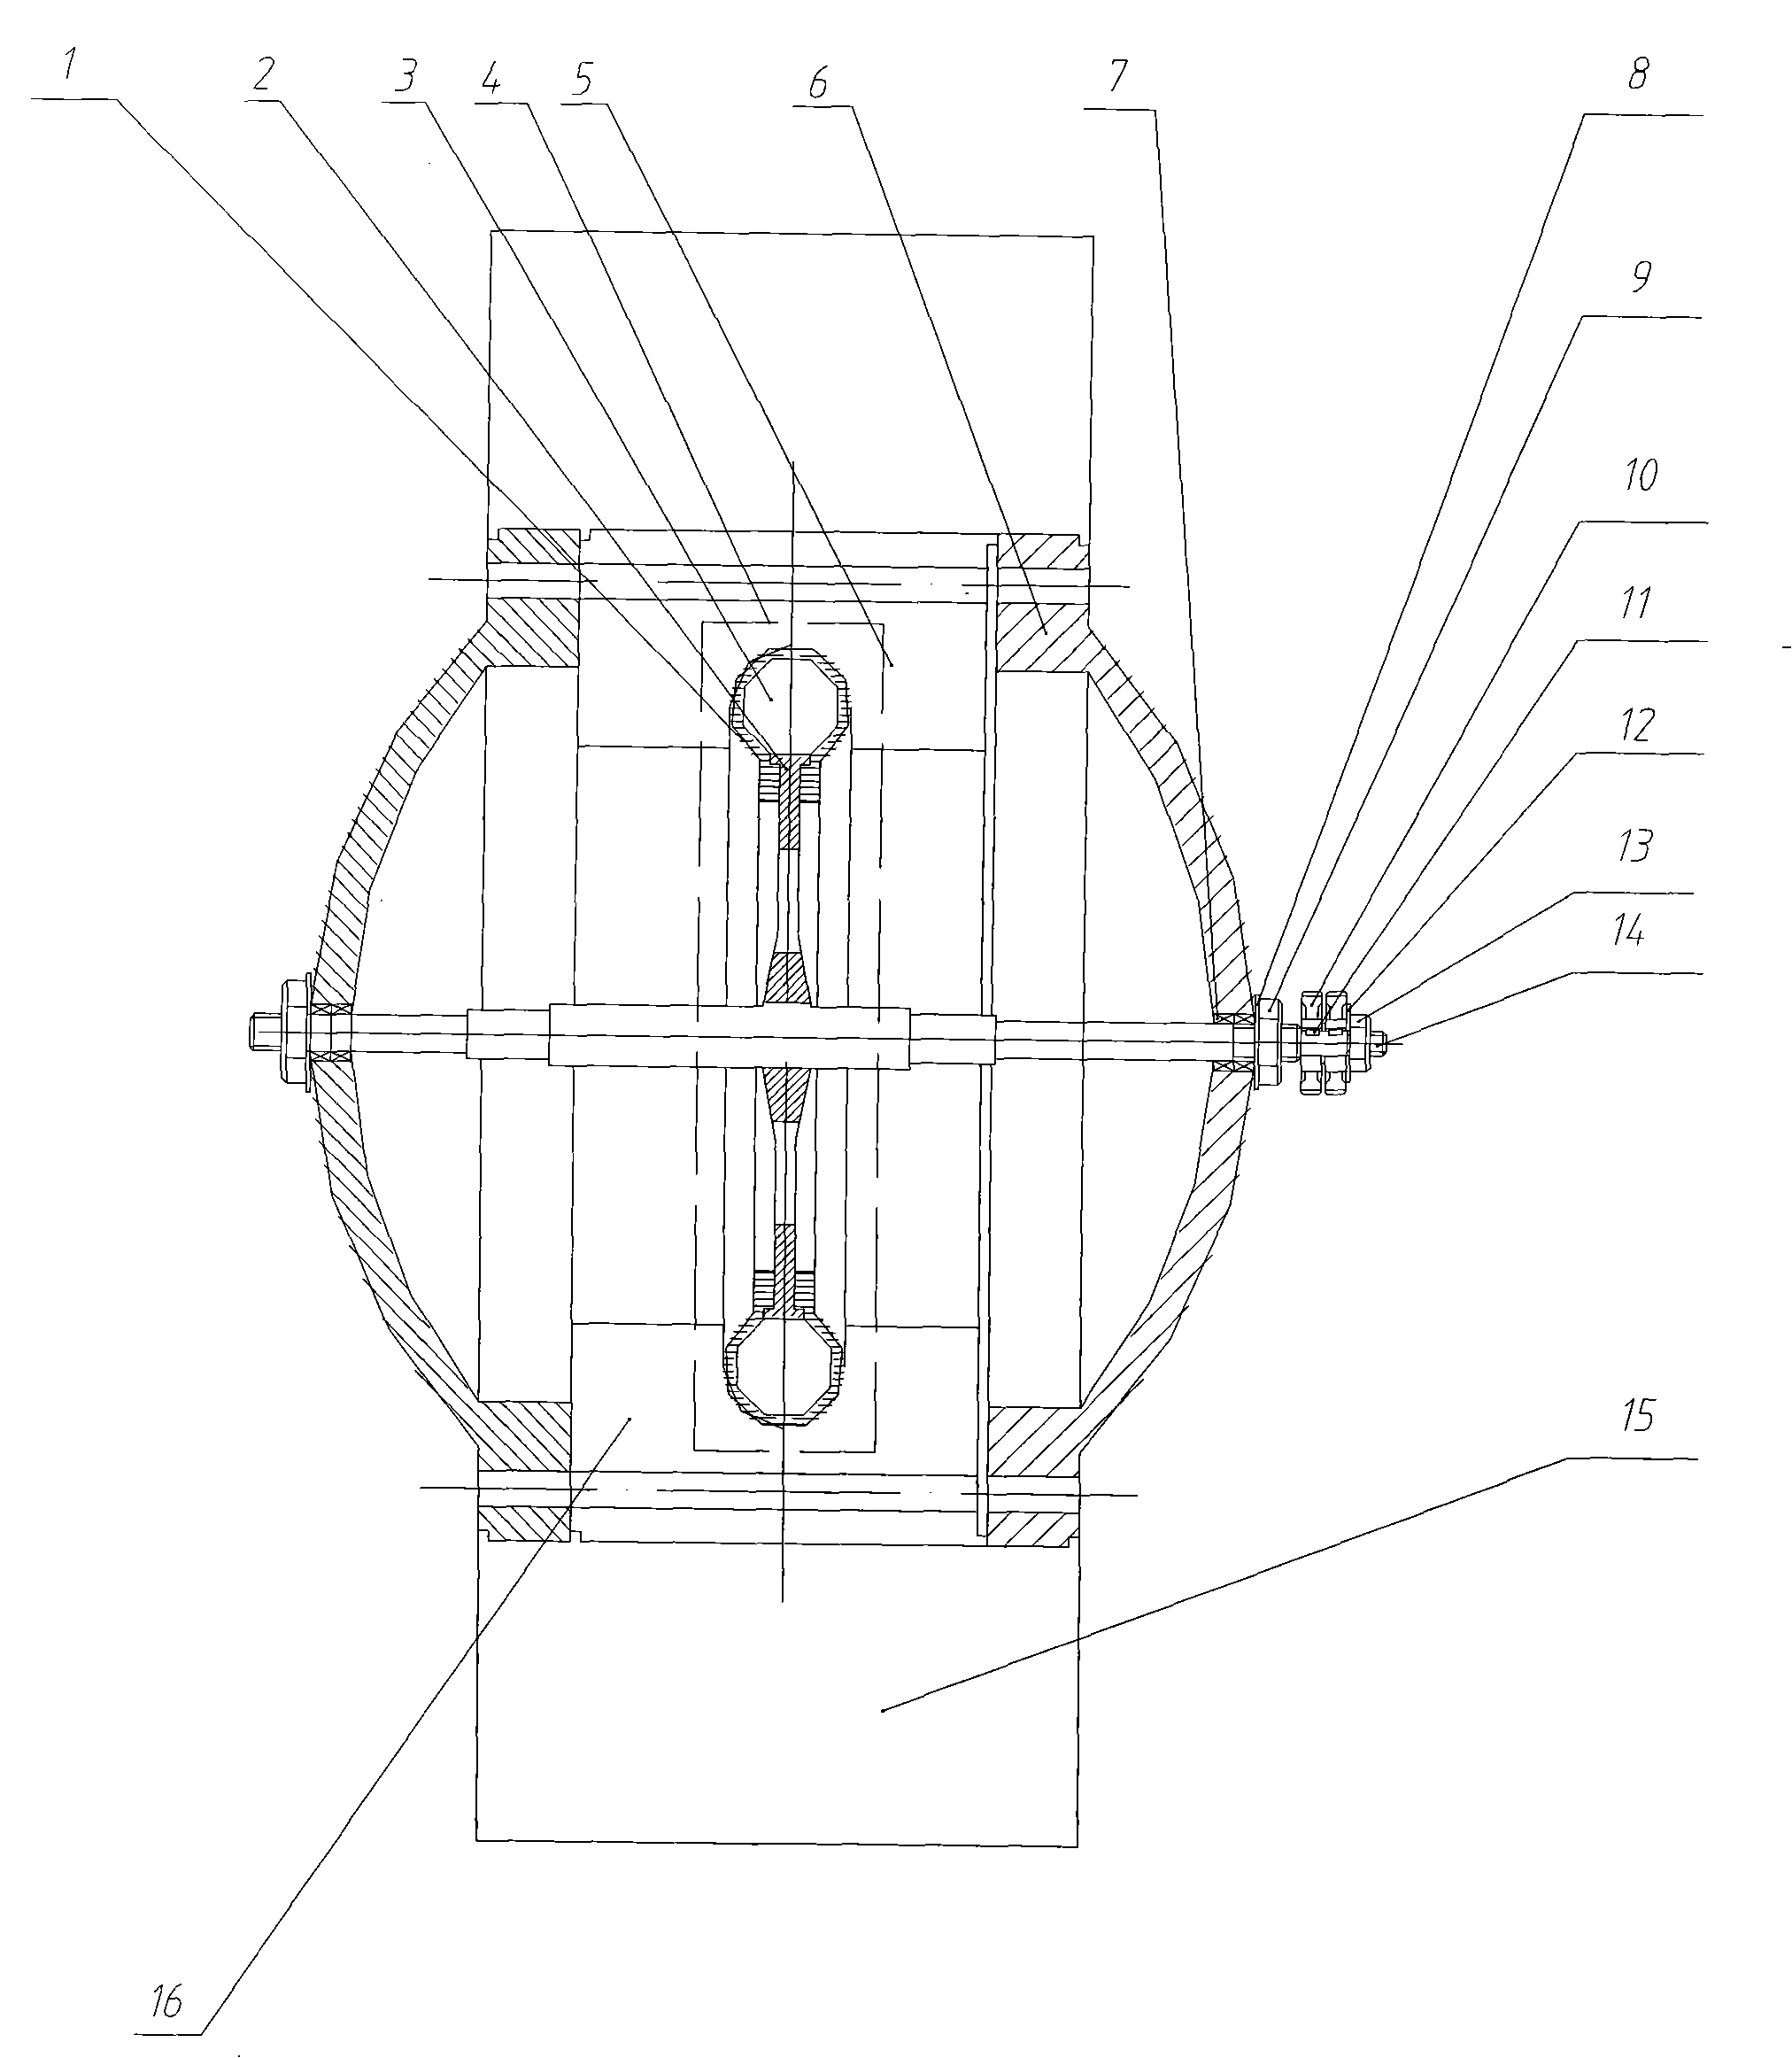 Cam mechanism inside internal combustion engine with piston doing circular motion